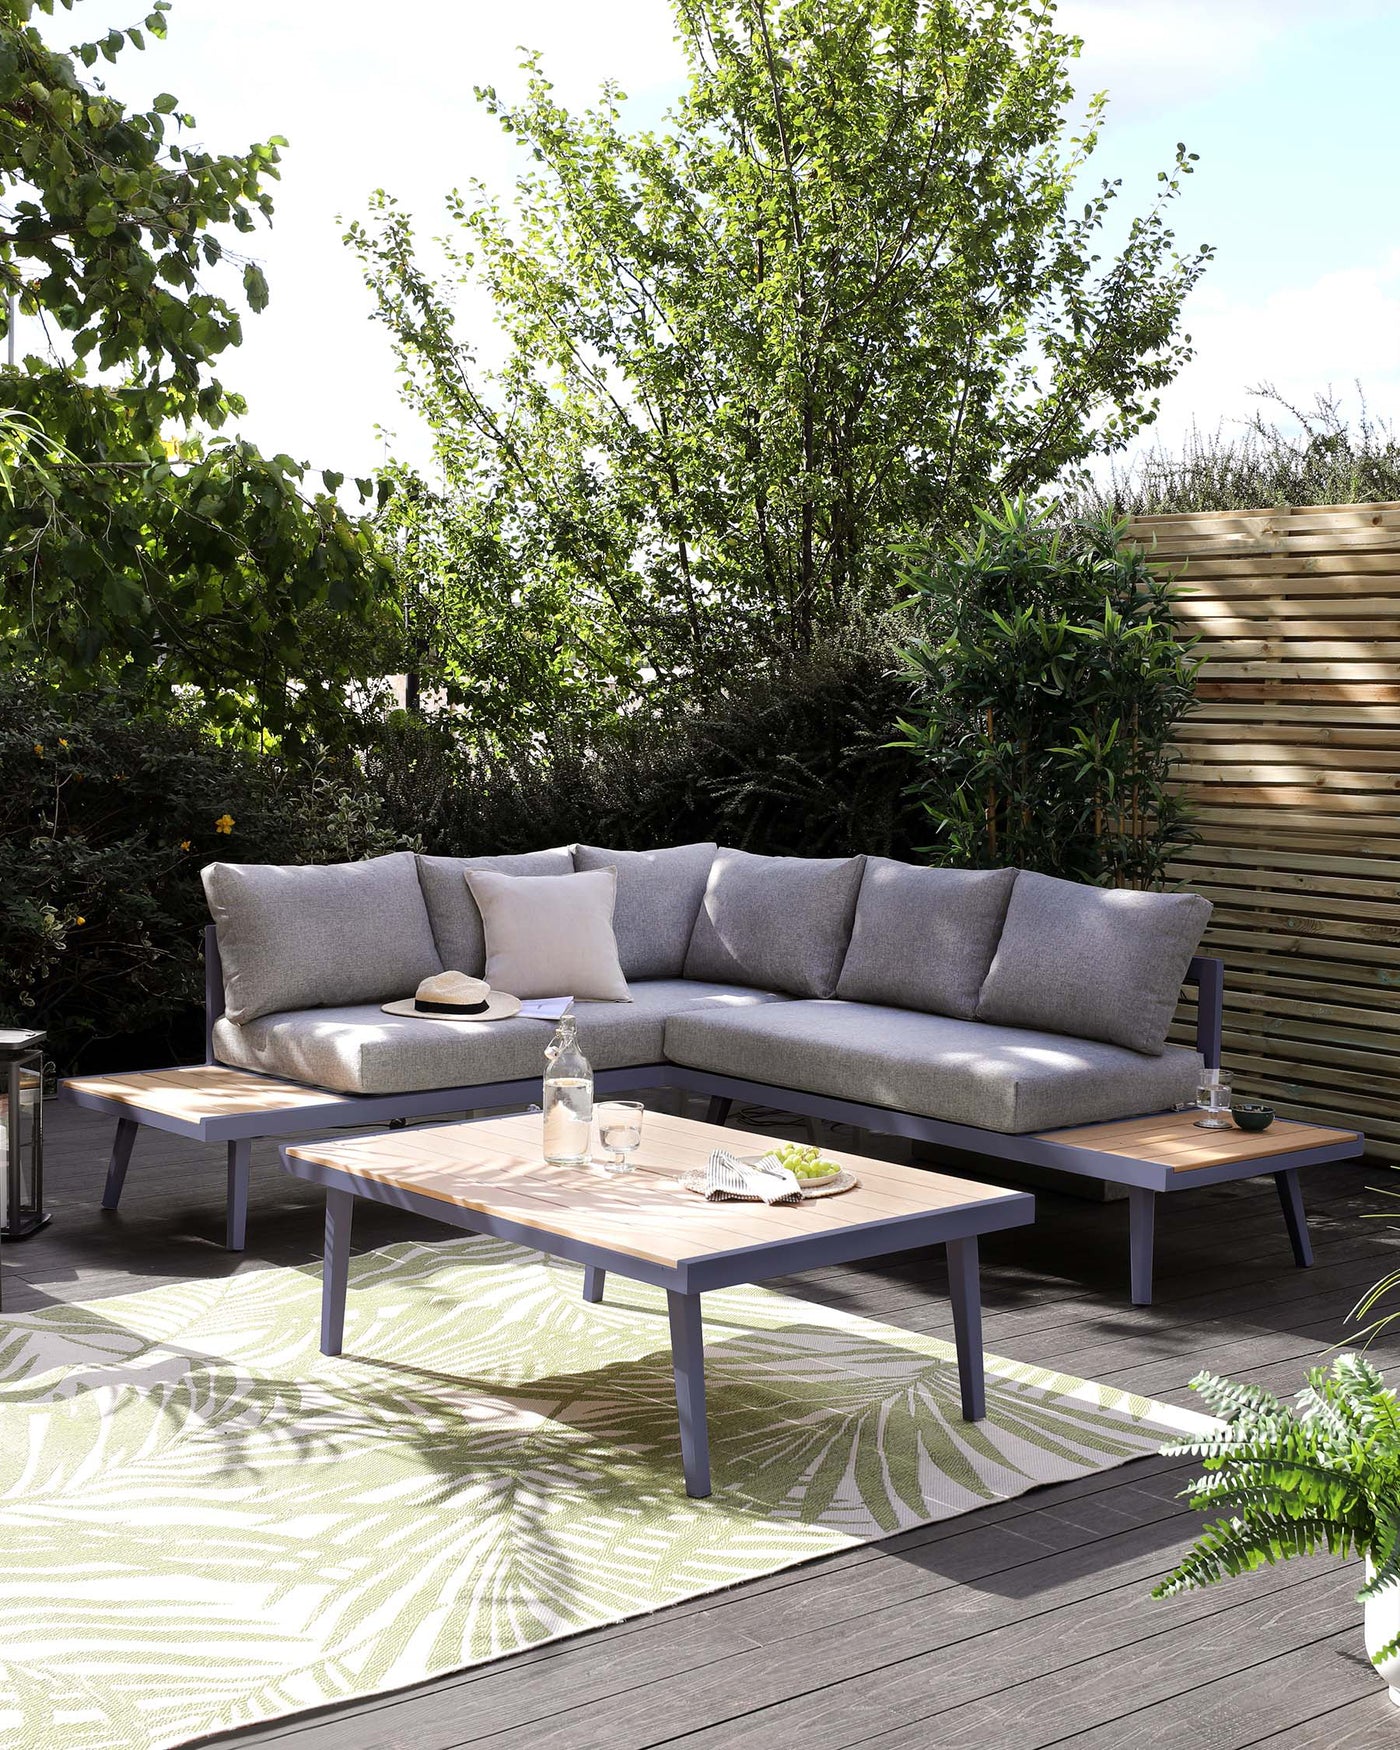 Modern outdoor furniture set including a sectional corner sofa with grey cushions on a wooden frame and two matching wooden tables with grey metal legs, displayed on a deck with a green patterned outdoor rug.